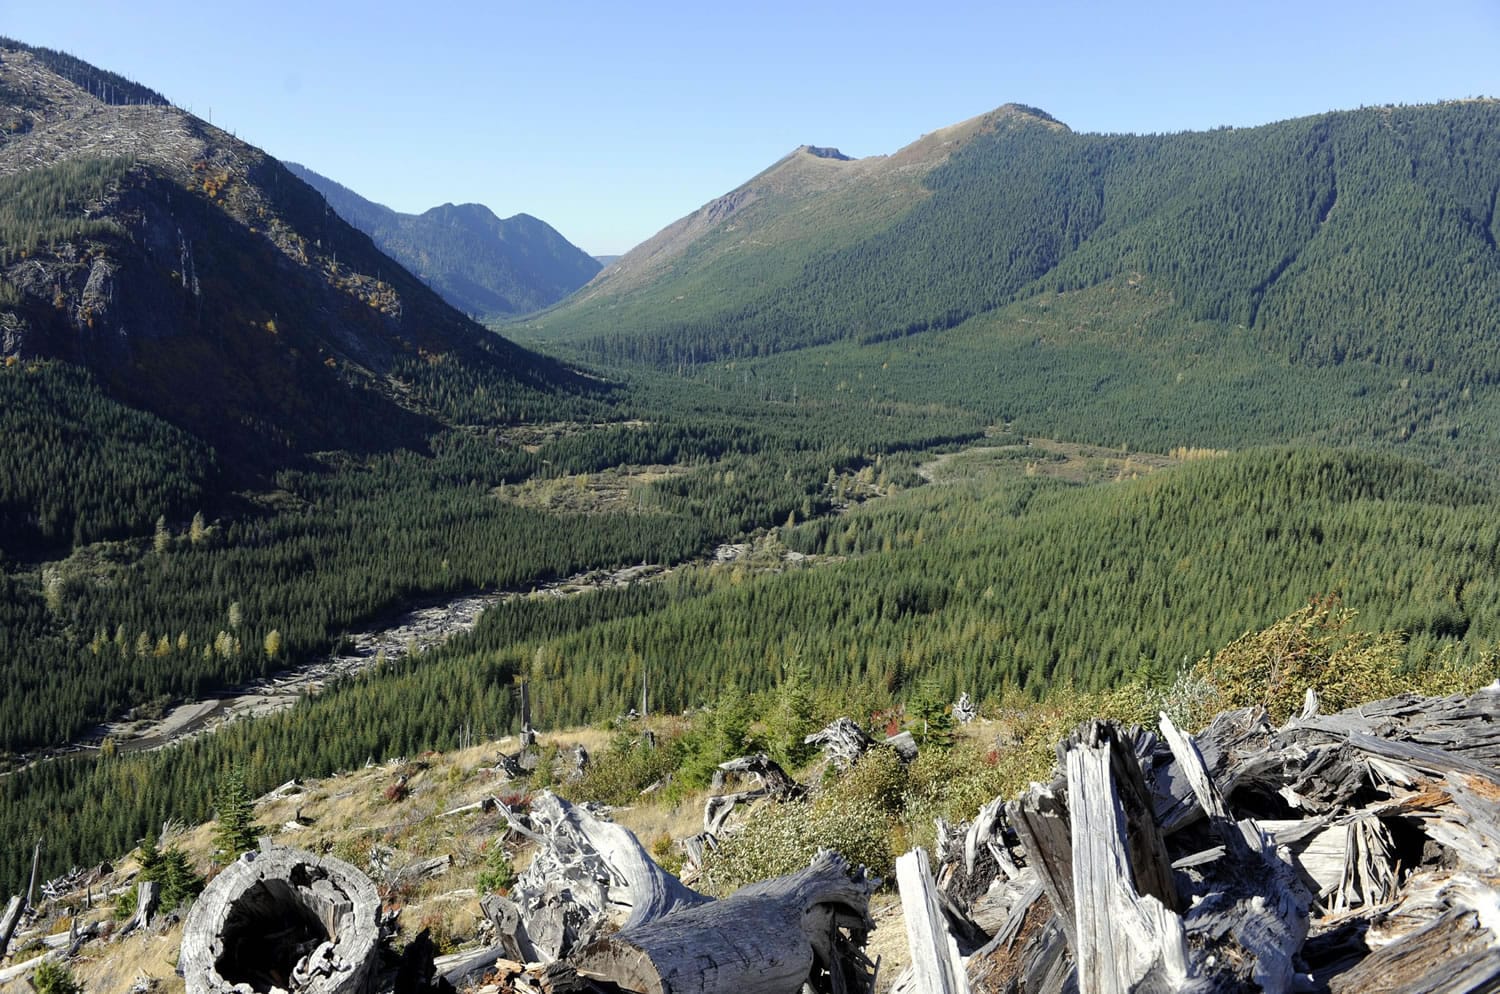 Ascot Resources hopes to pursue exploratory drilling northwest of Mount St. Helens in Skamania County.